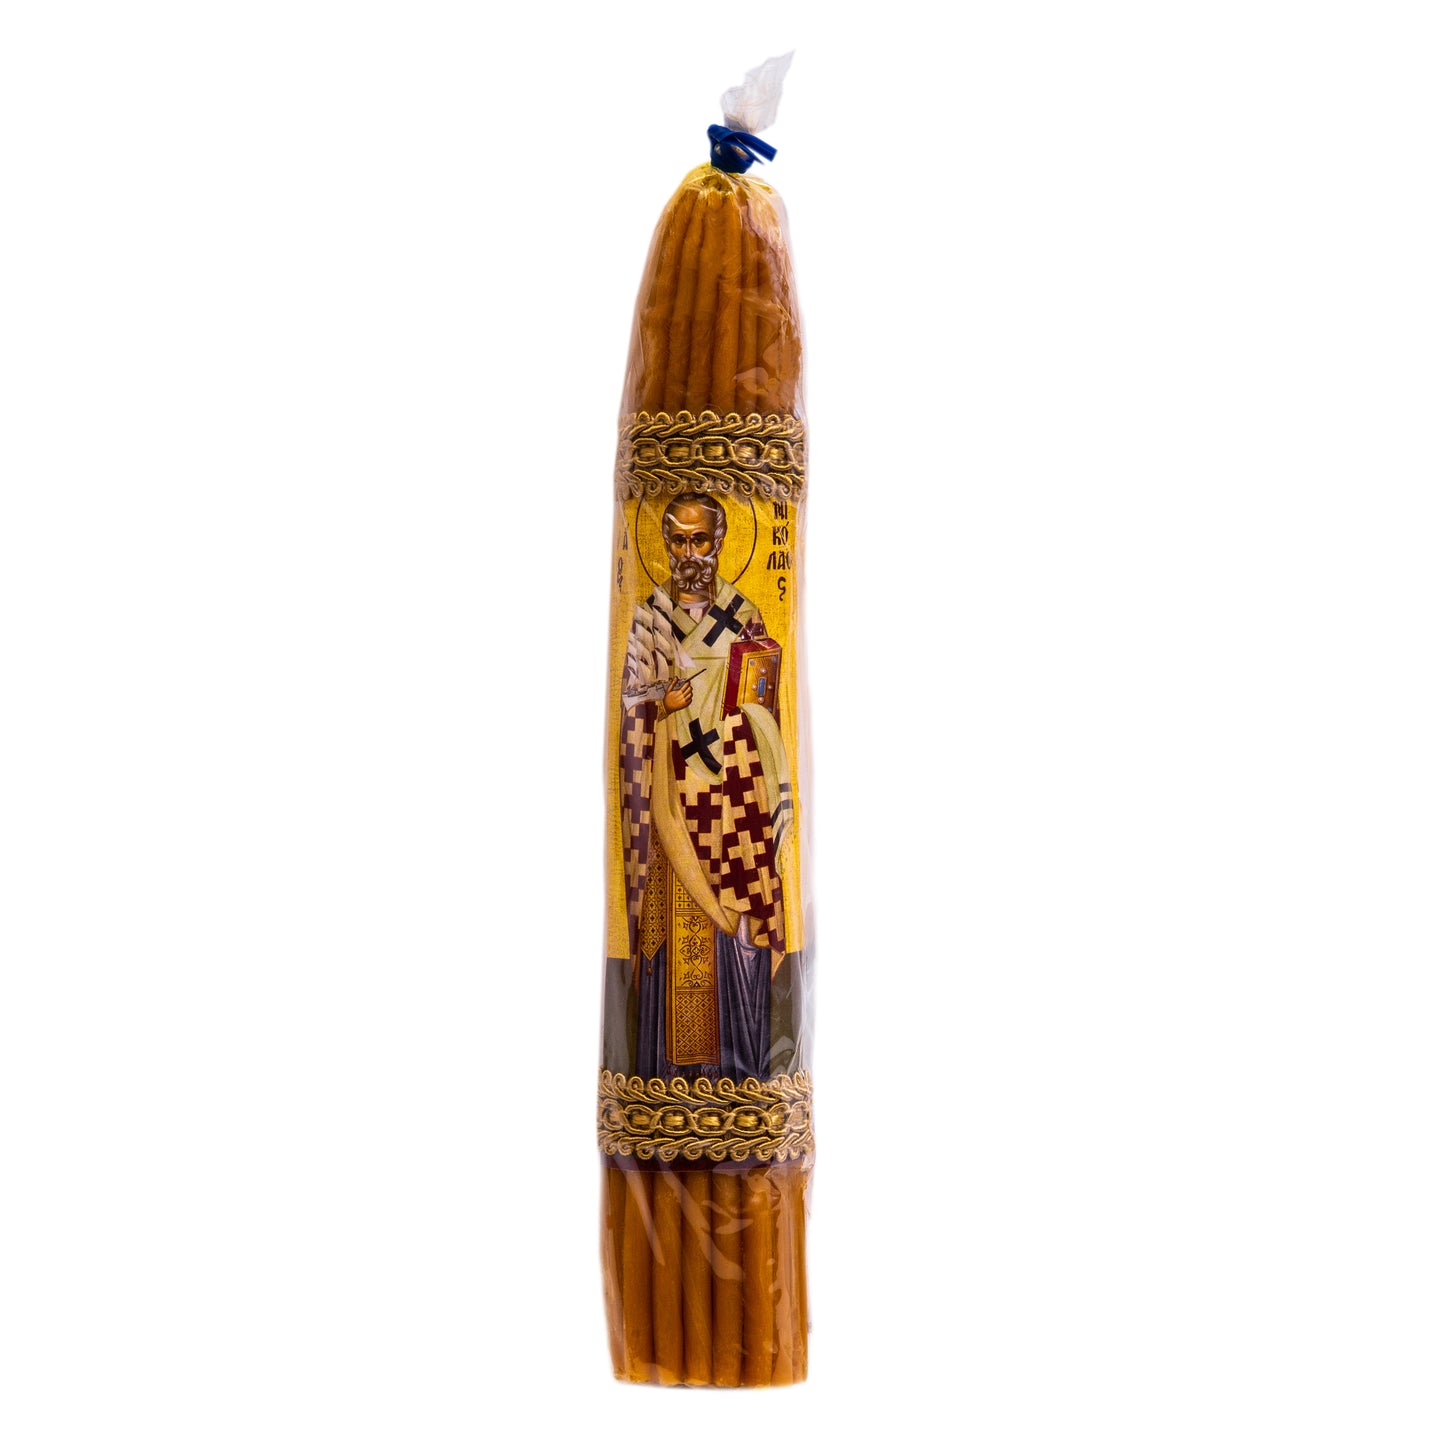 St. Nicholas Beeswax Candles